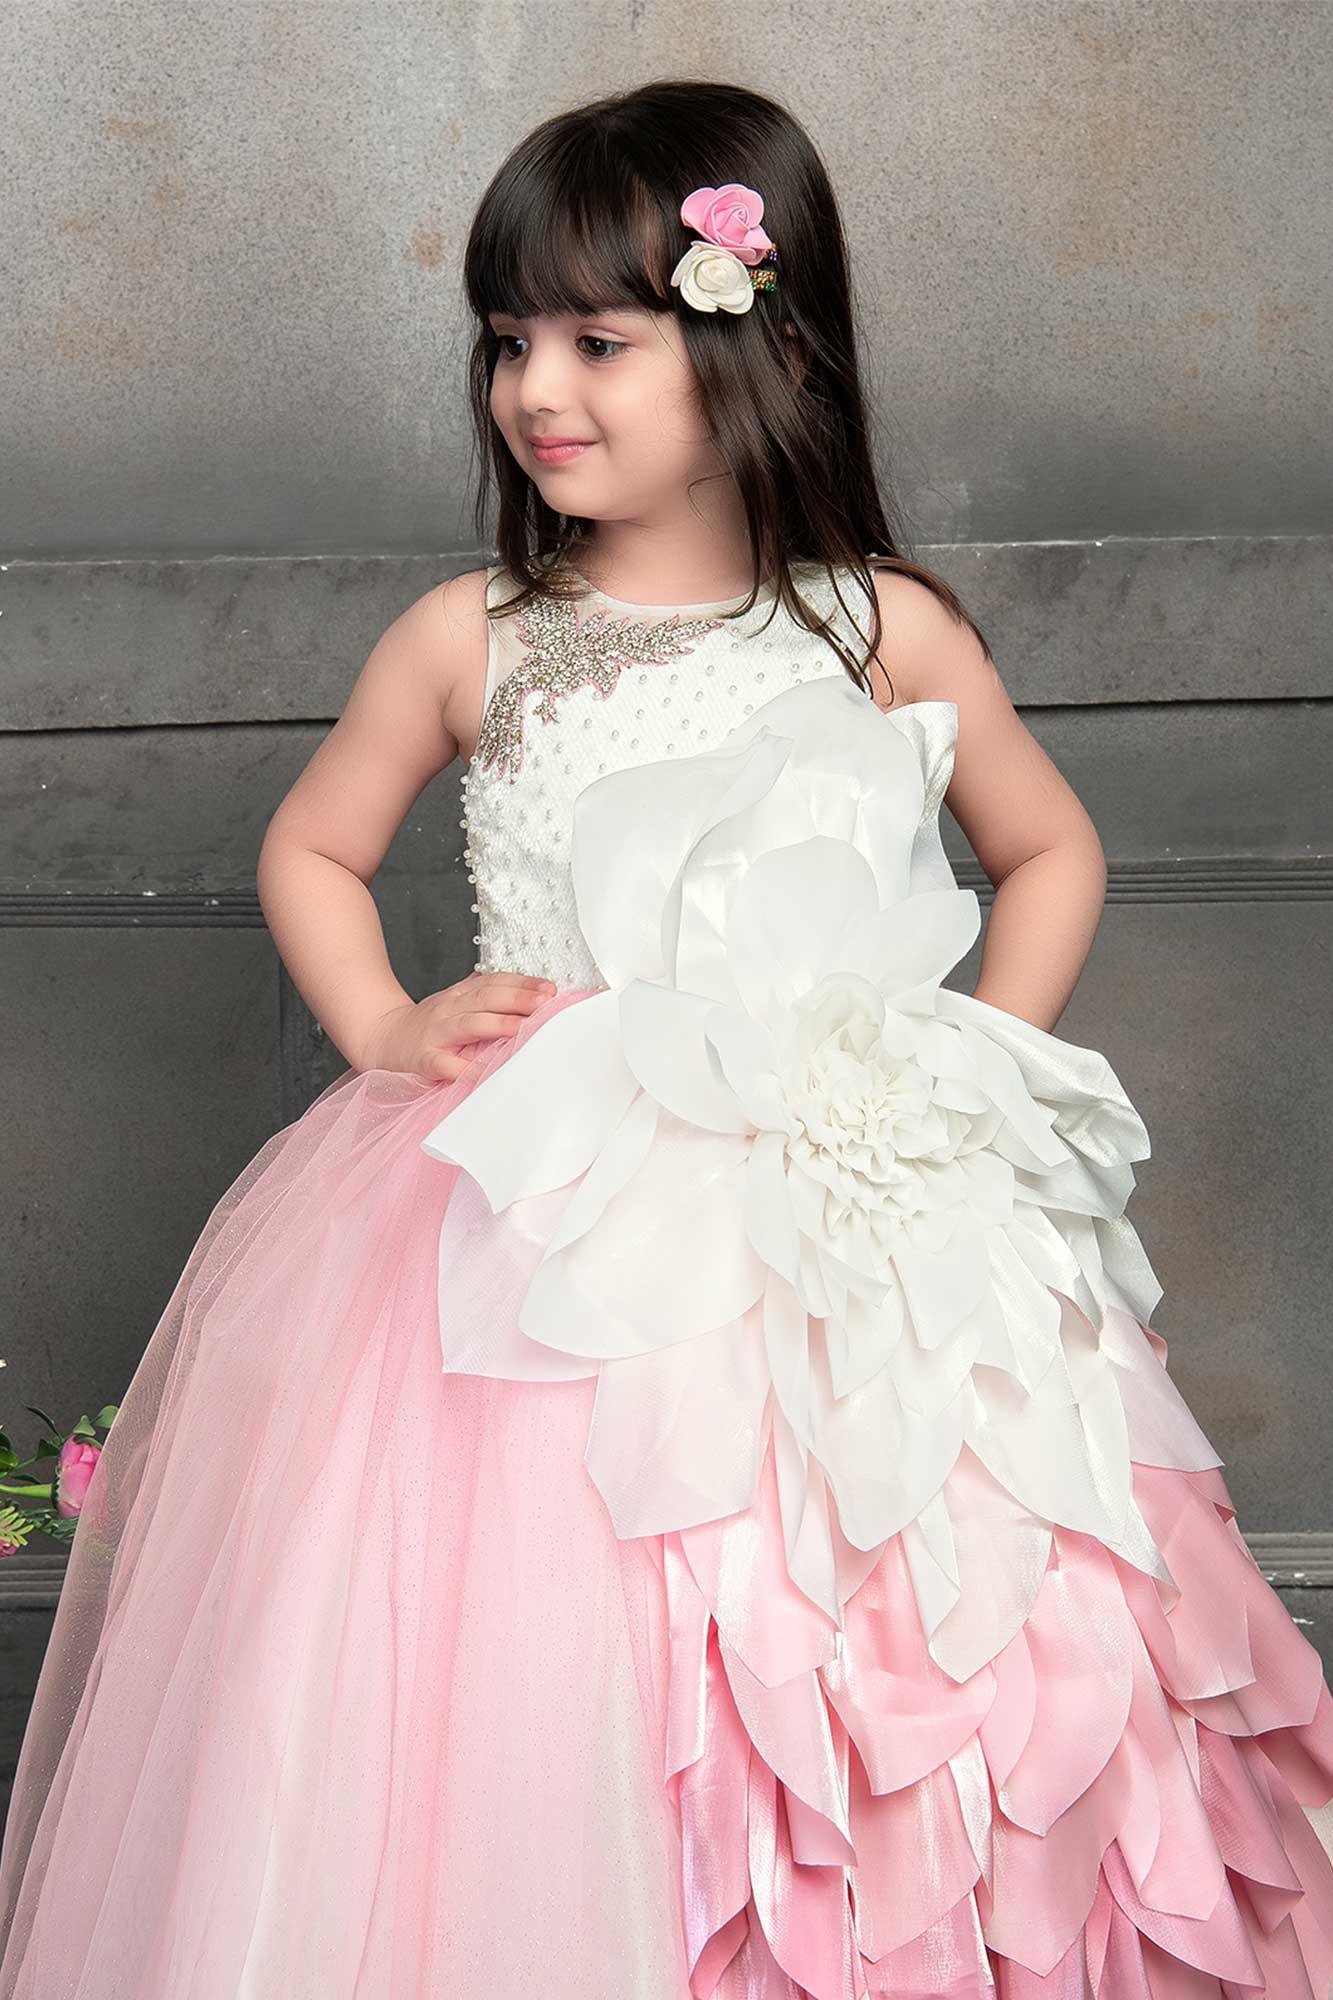 Party Dresses - 50 Latest and Different Designs for Women and Girls